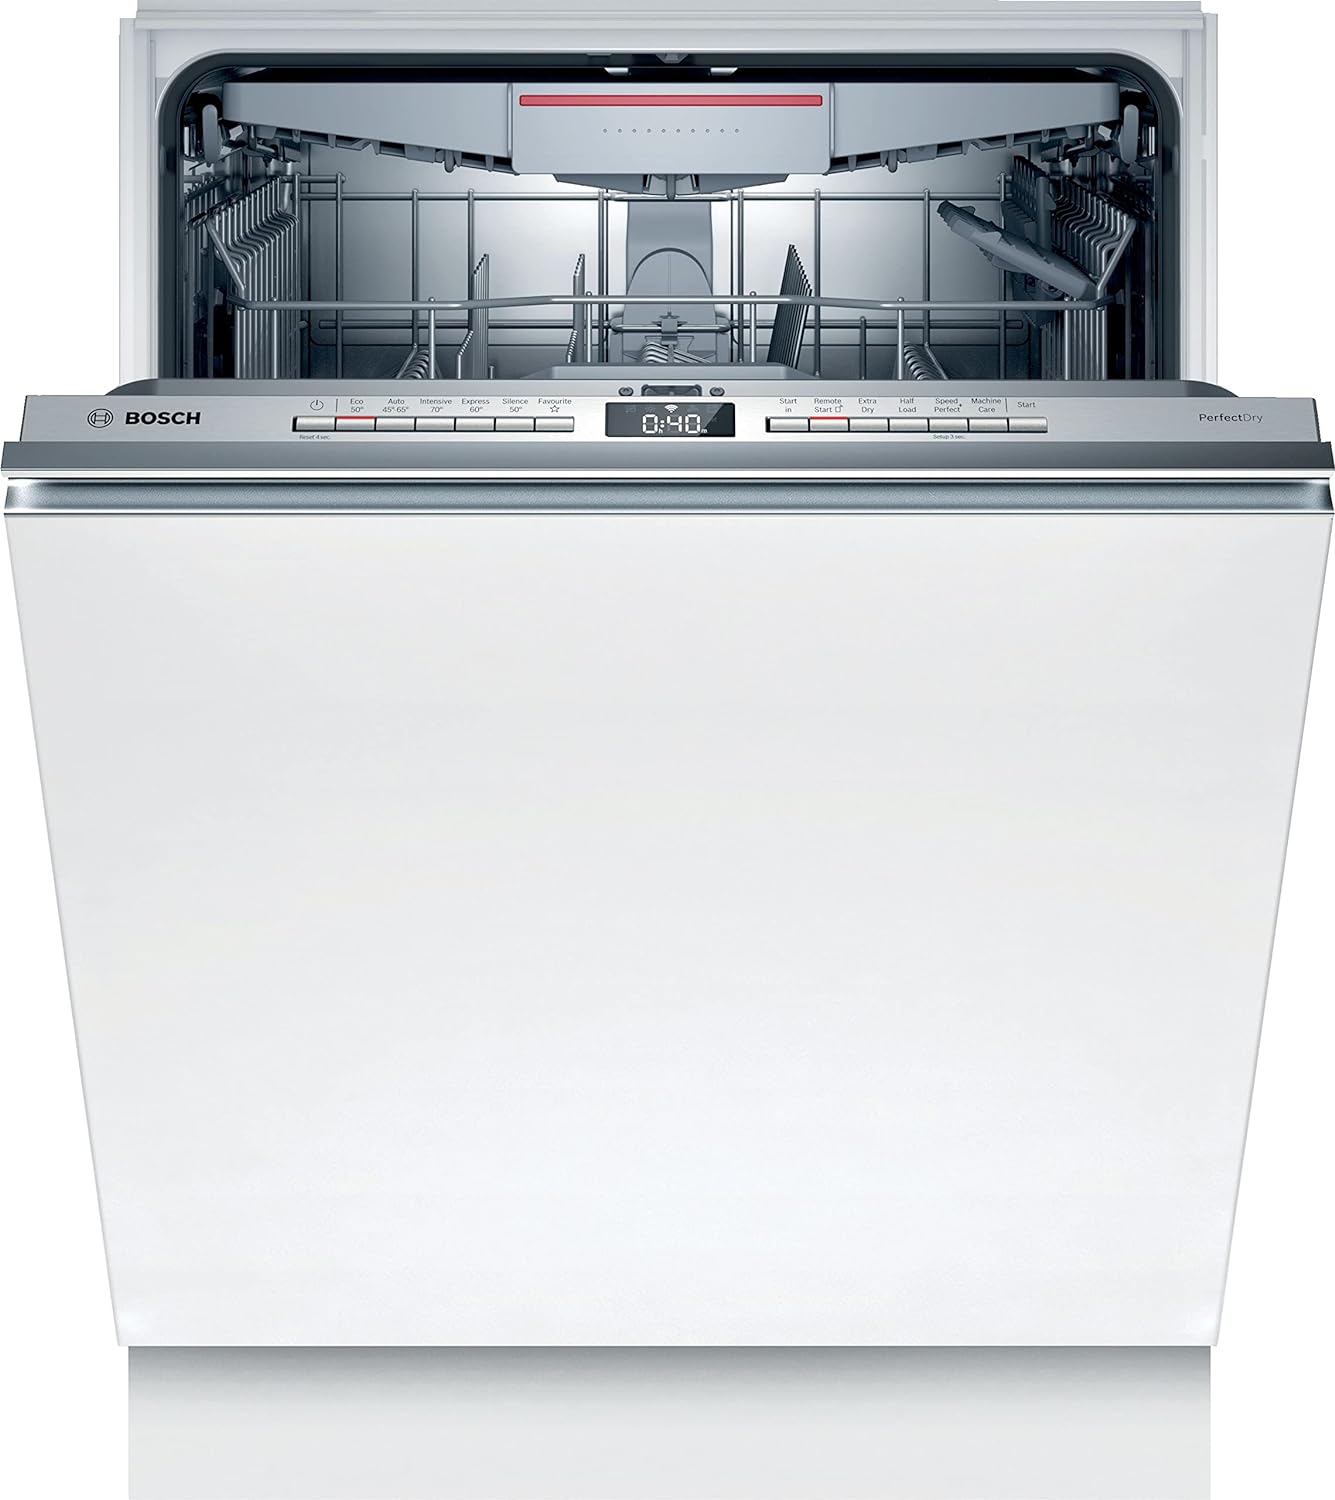 Bosch Home Kitchen Appliances Bosch Series 6 SMV6ZCX01G Dishwasher with 14 place settings, PerfectDry, TimeLight, Wifi enabled via Home Connect, Integrated, 60 cm wide [Energy Class C]